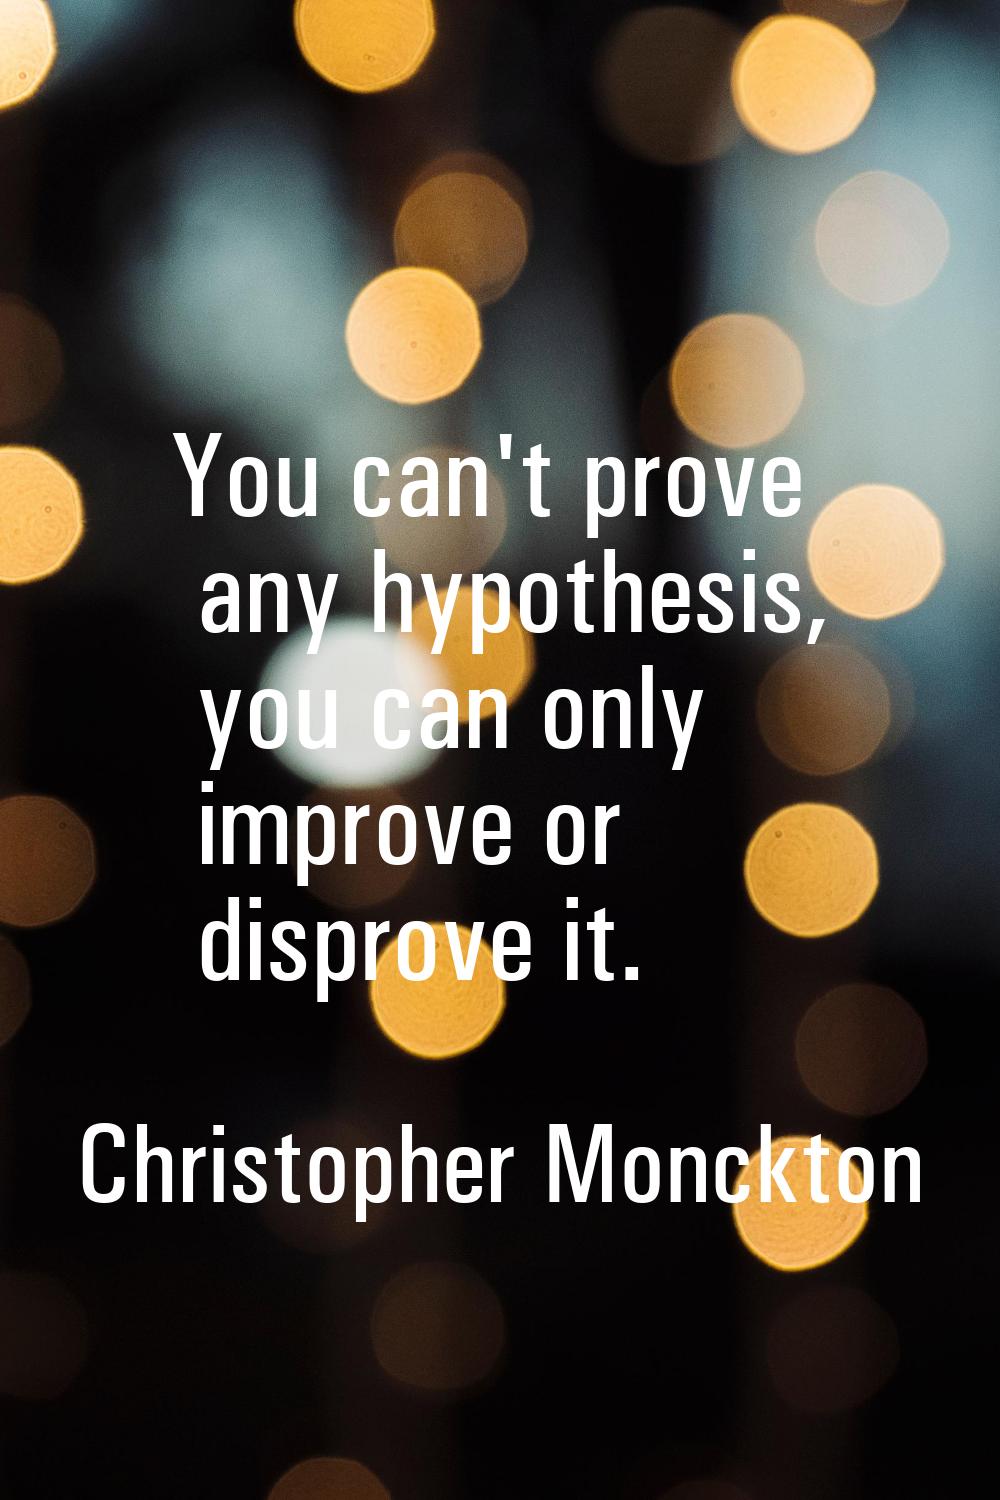 You can't prove any hypothesis, you can only improve or disprove it.